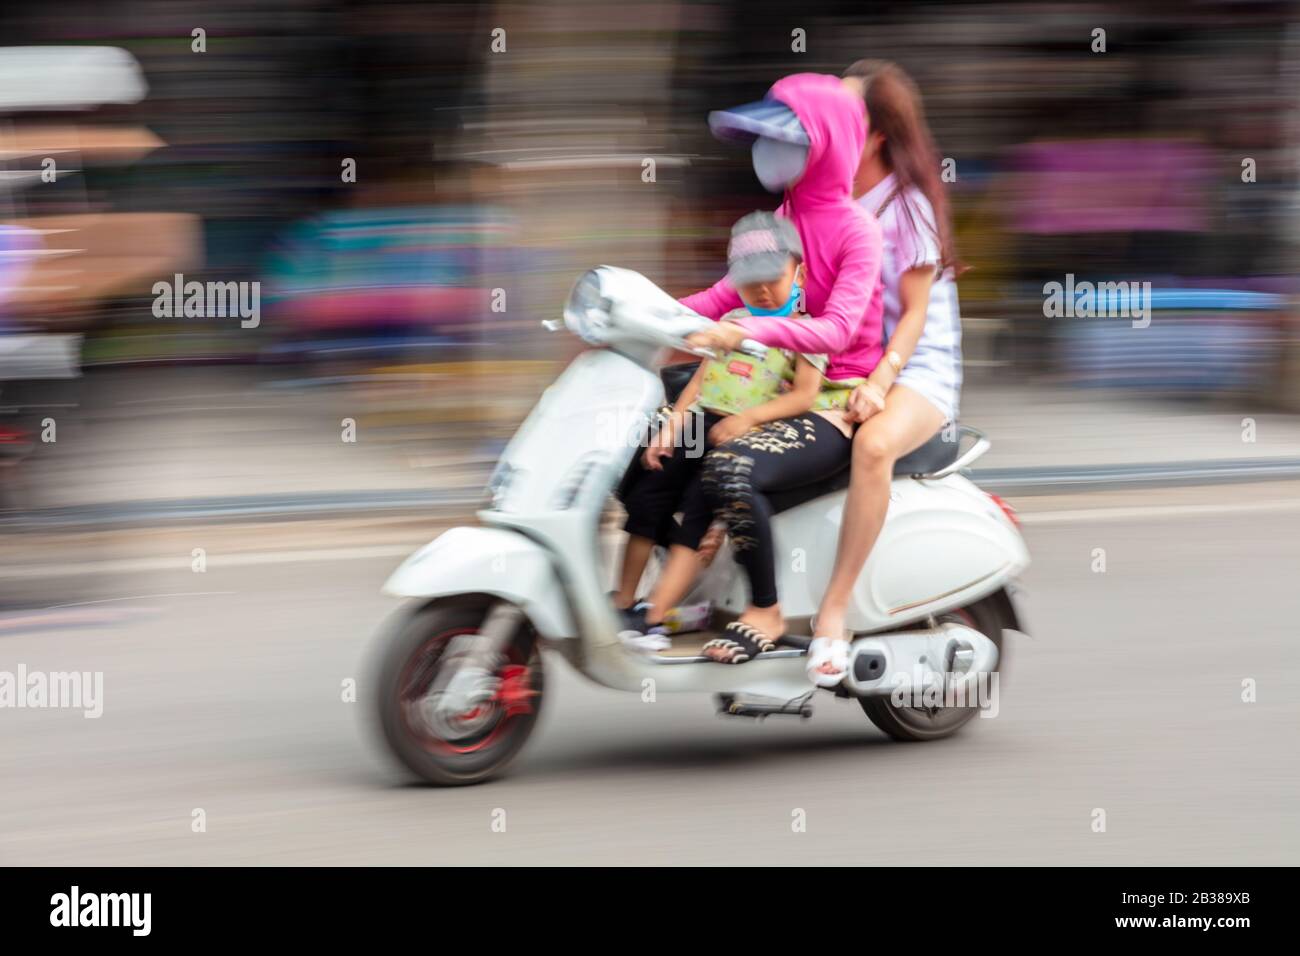 Motion blurred photograph of local people, women and a child, wearing facemasks, riding moped scooter on the streets of Hanoi, Vietnam, April 3 2018 Stock Photo